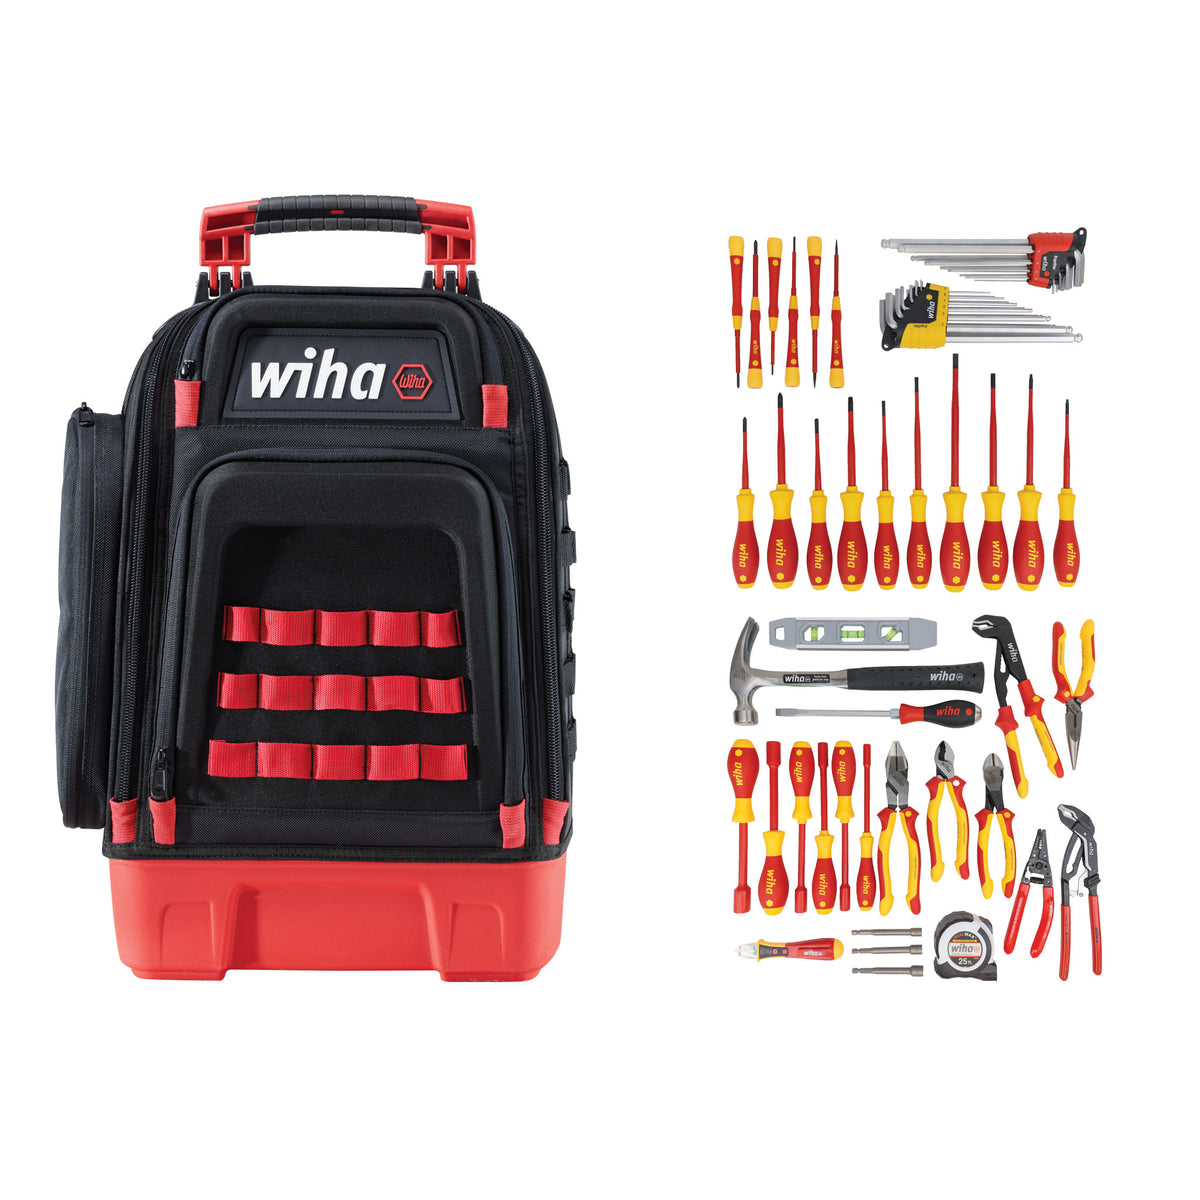 Wiha 91872 59 Piece Master Electrician's Insulated Tool Kit in Heavy Duty Backpack